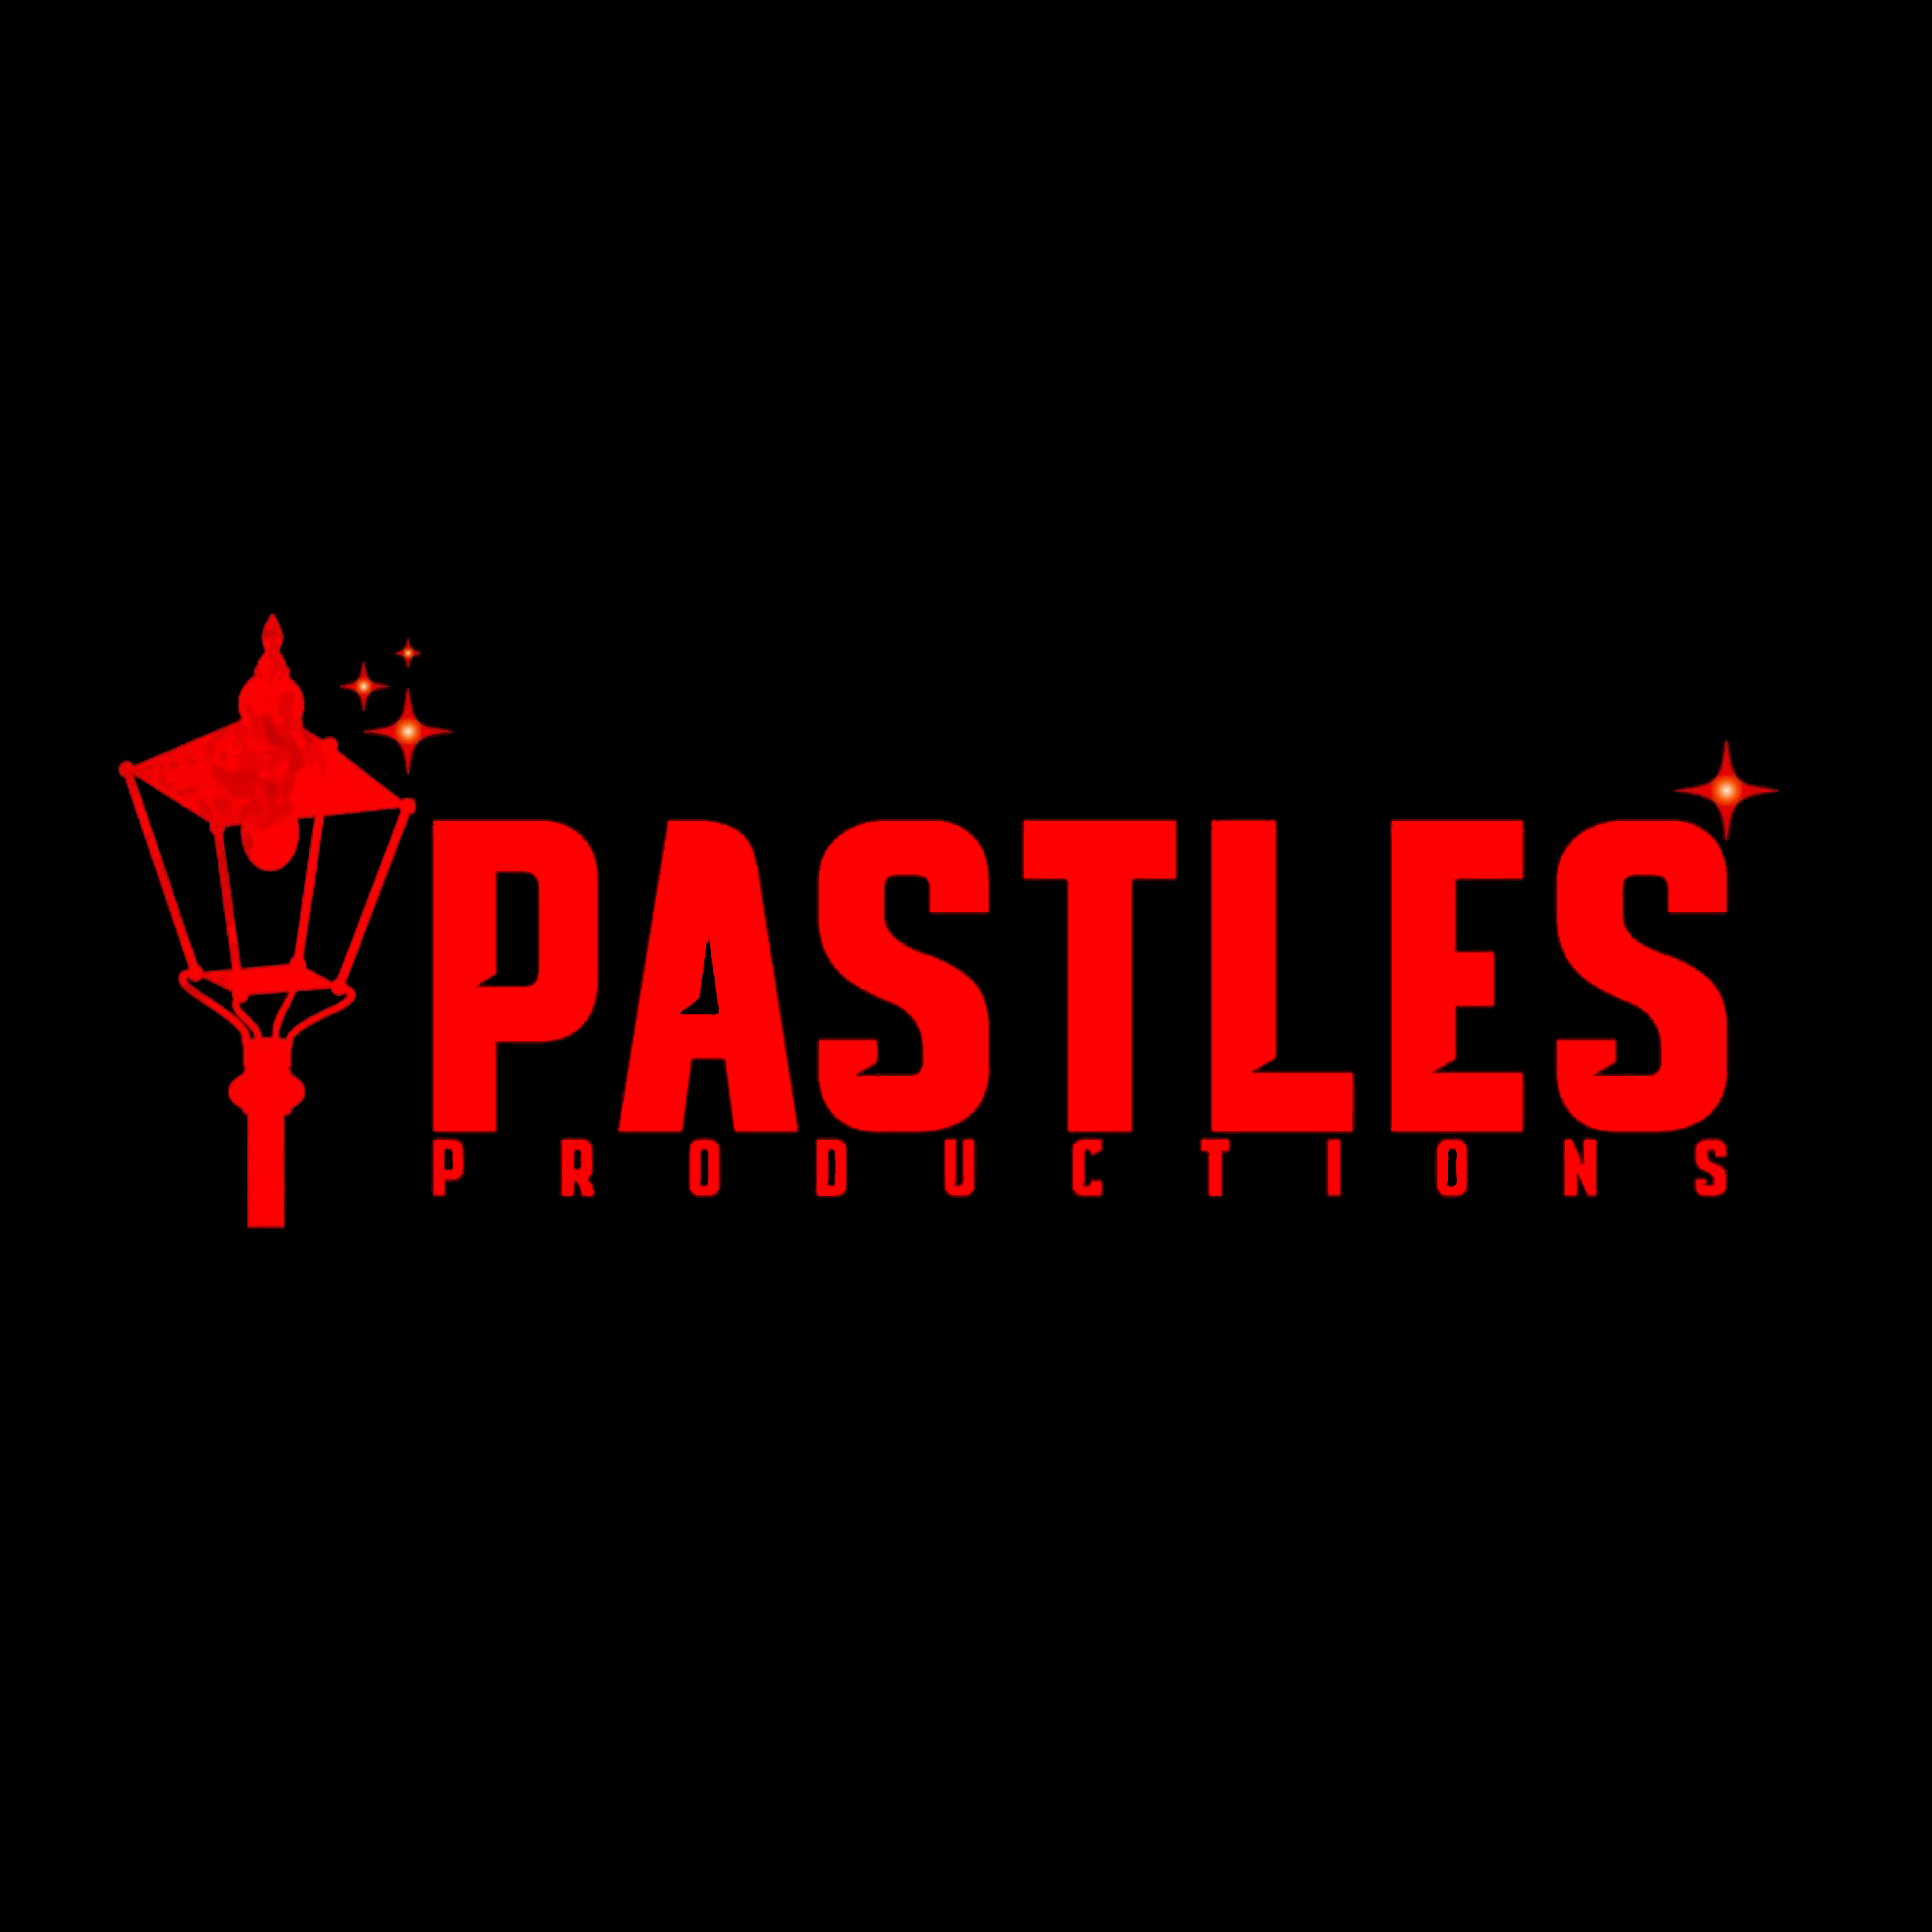 Pastles Productions Logo